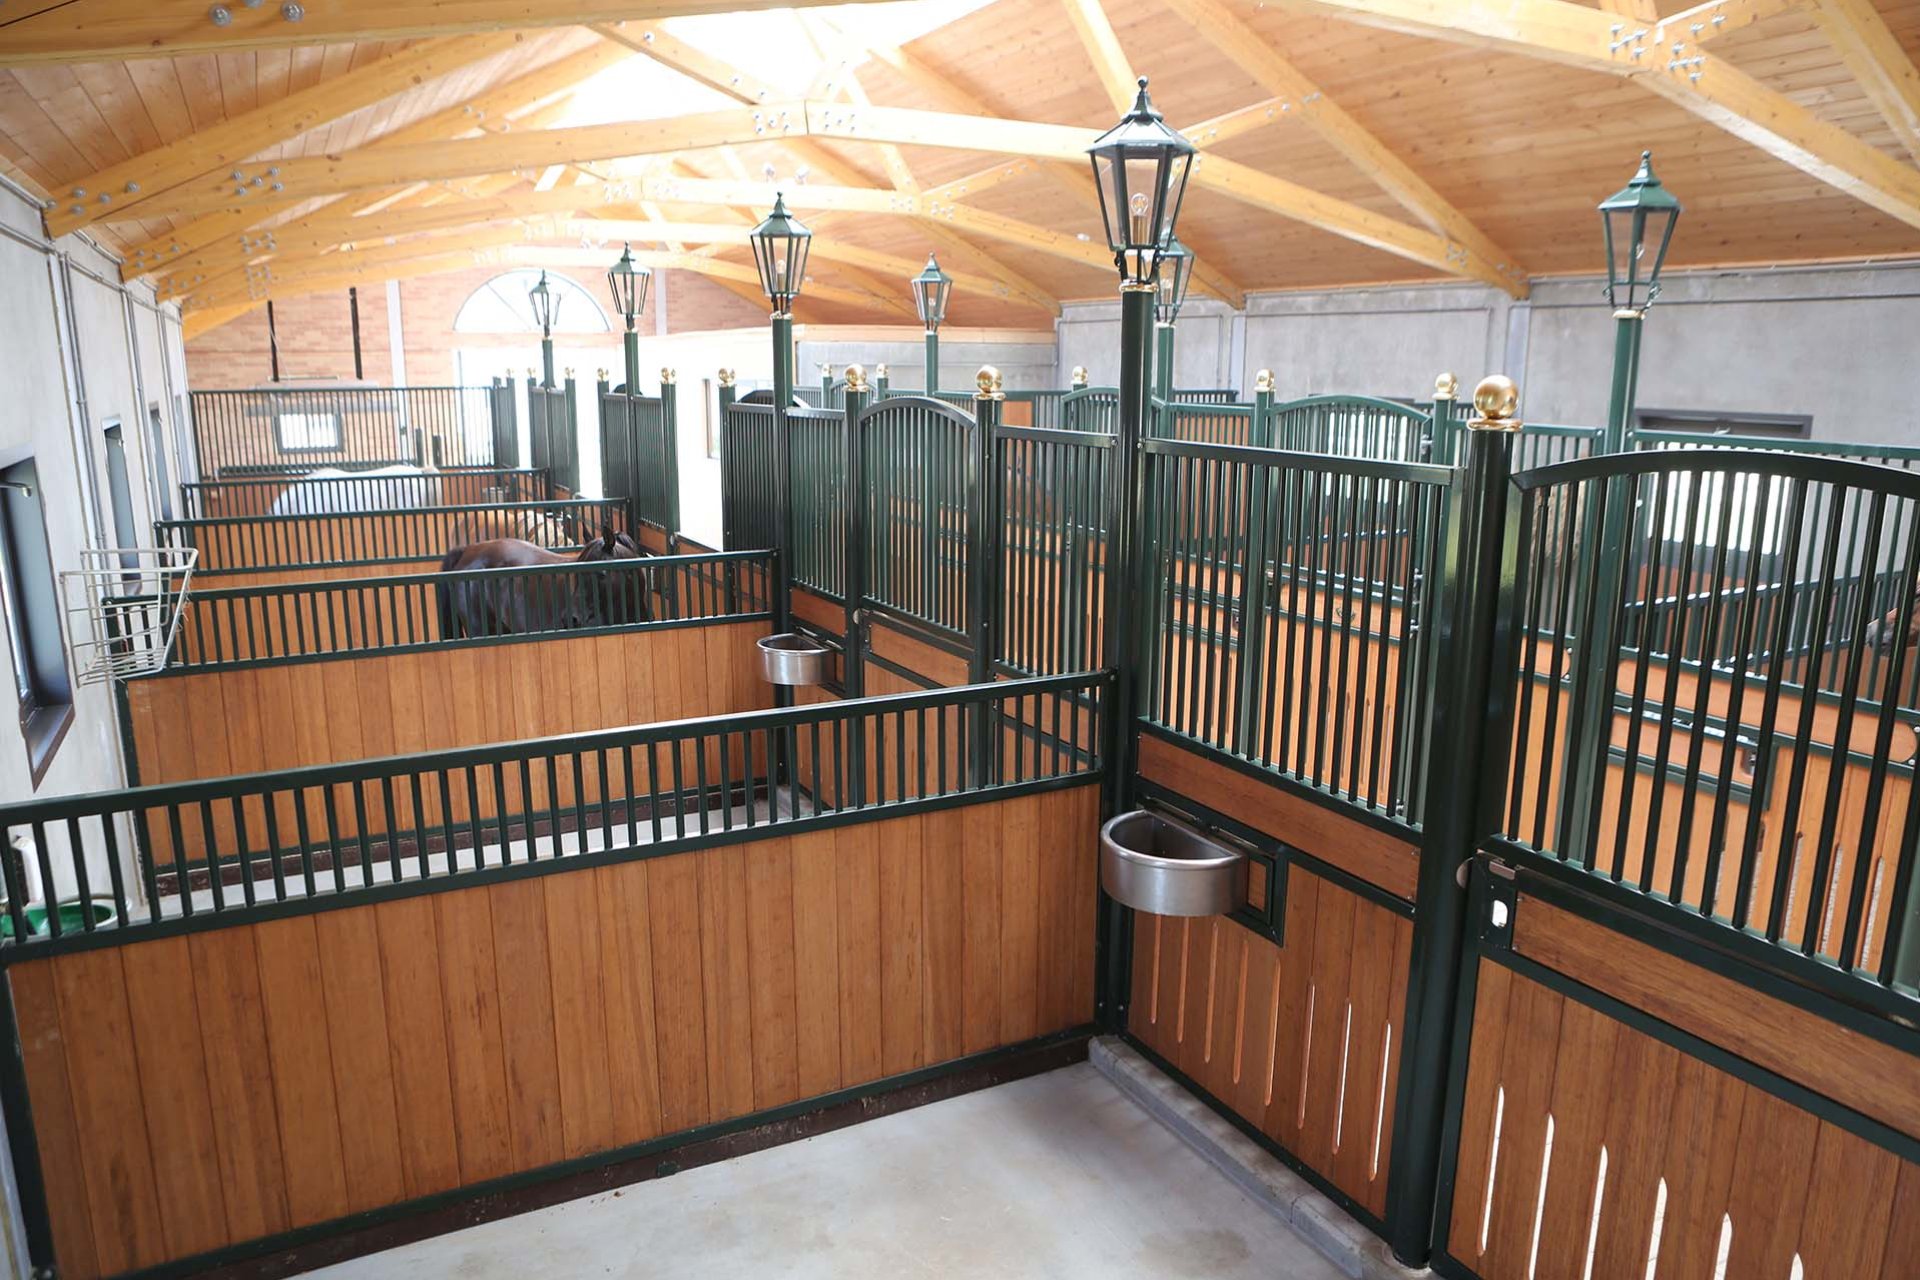 Image horse stall stable partitions (M000026718)